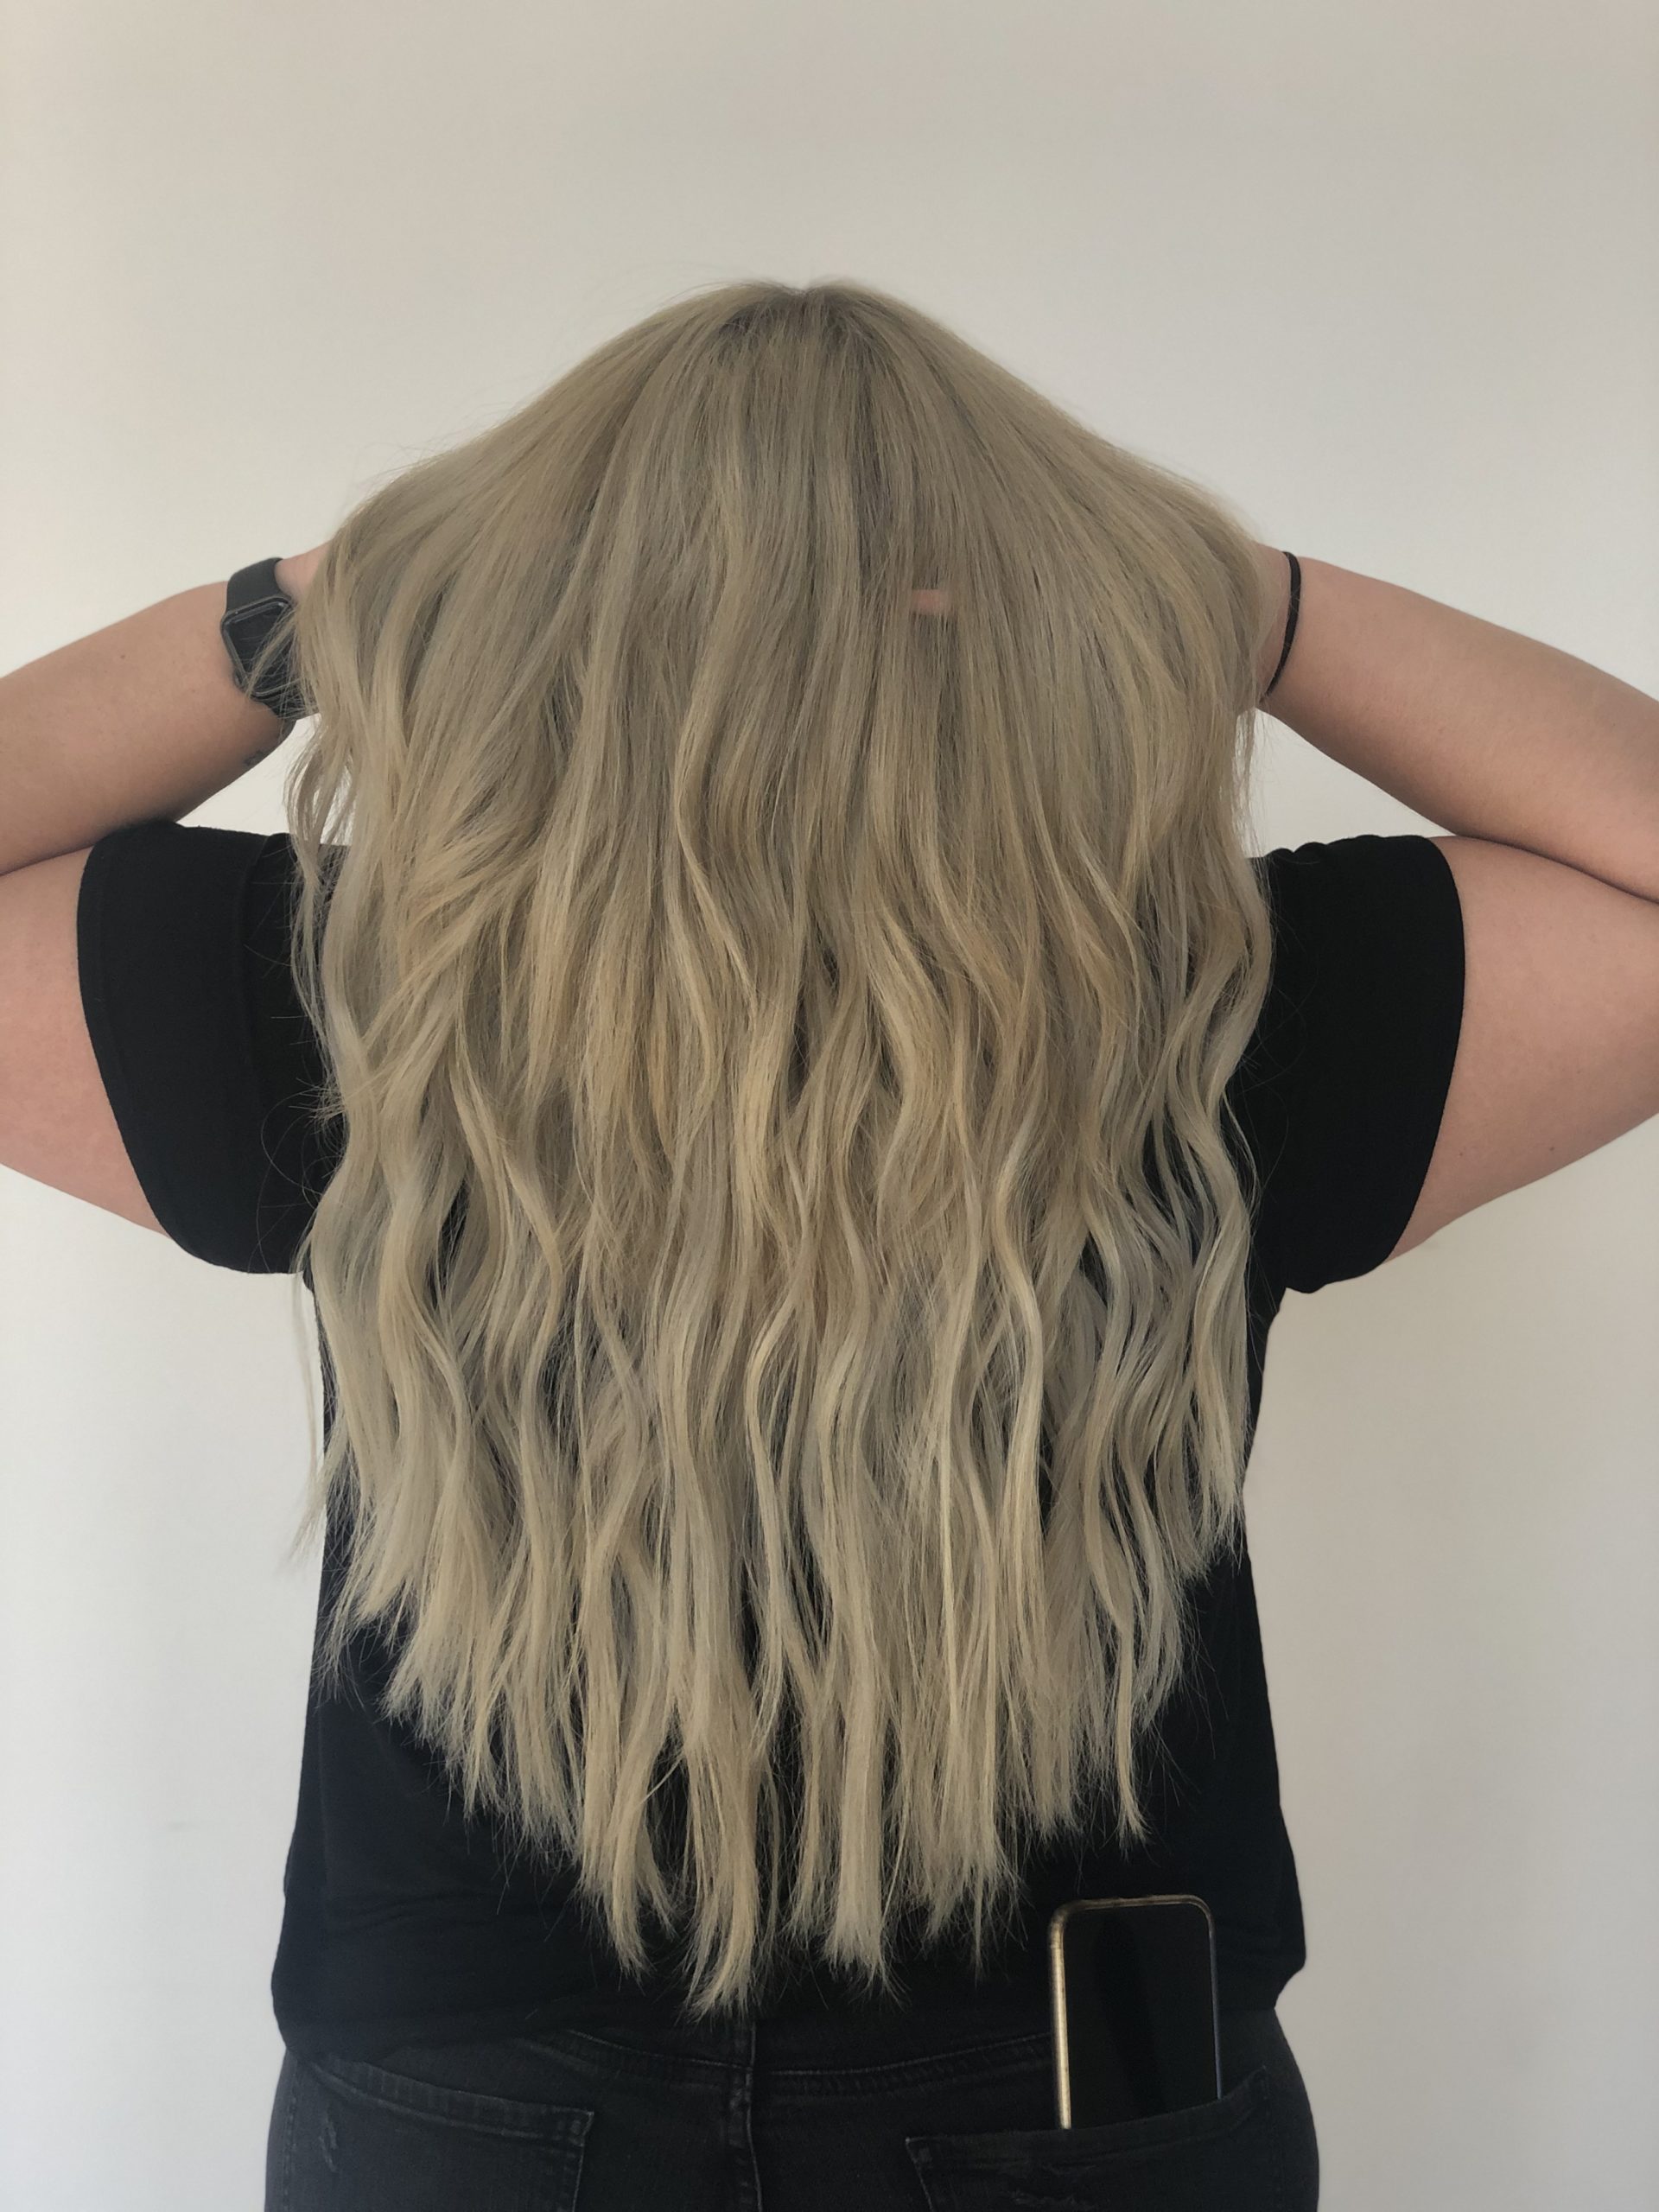 Long ash blond hand tied hair extensions done by Beautify Salon and Spa in Henderson Las Vegas